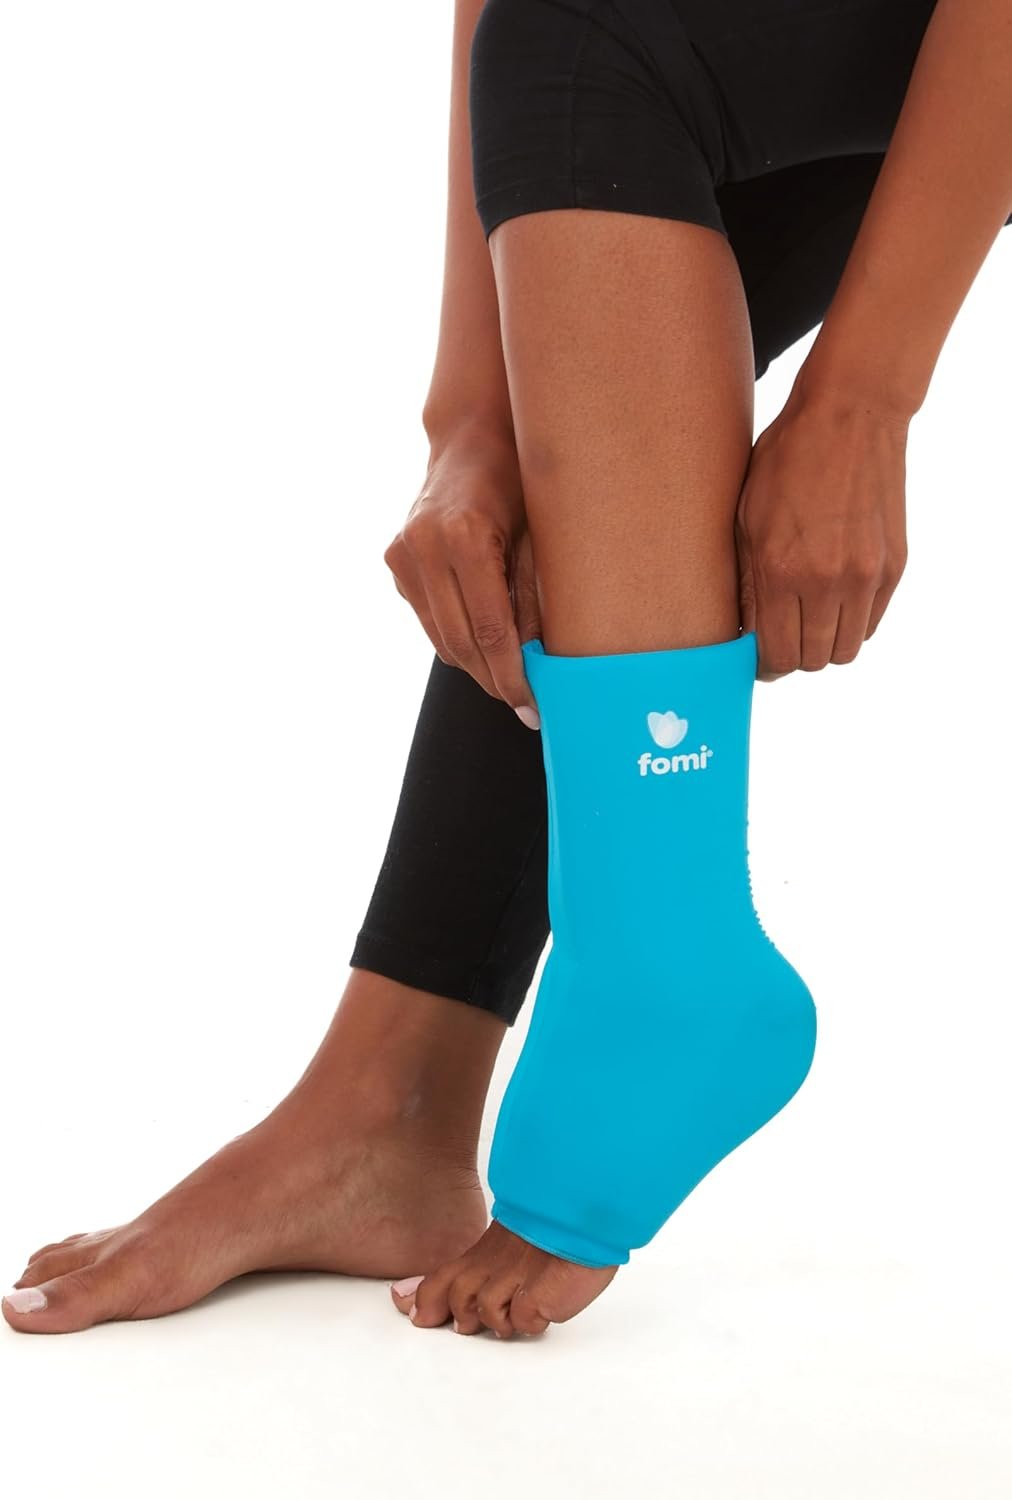 FOMI Hot Cold Ankle Foot Gel Ice Pack Wrap Review